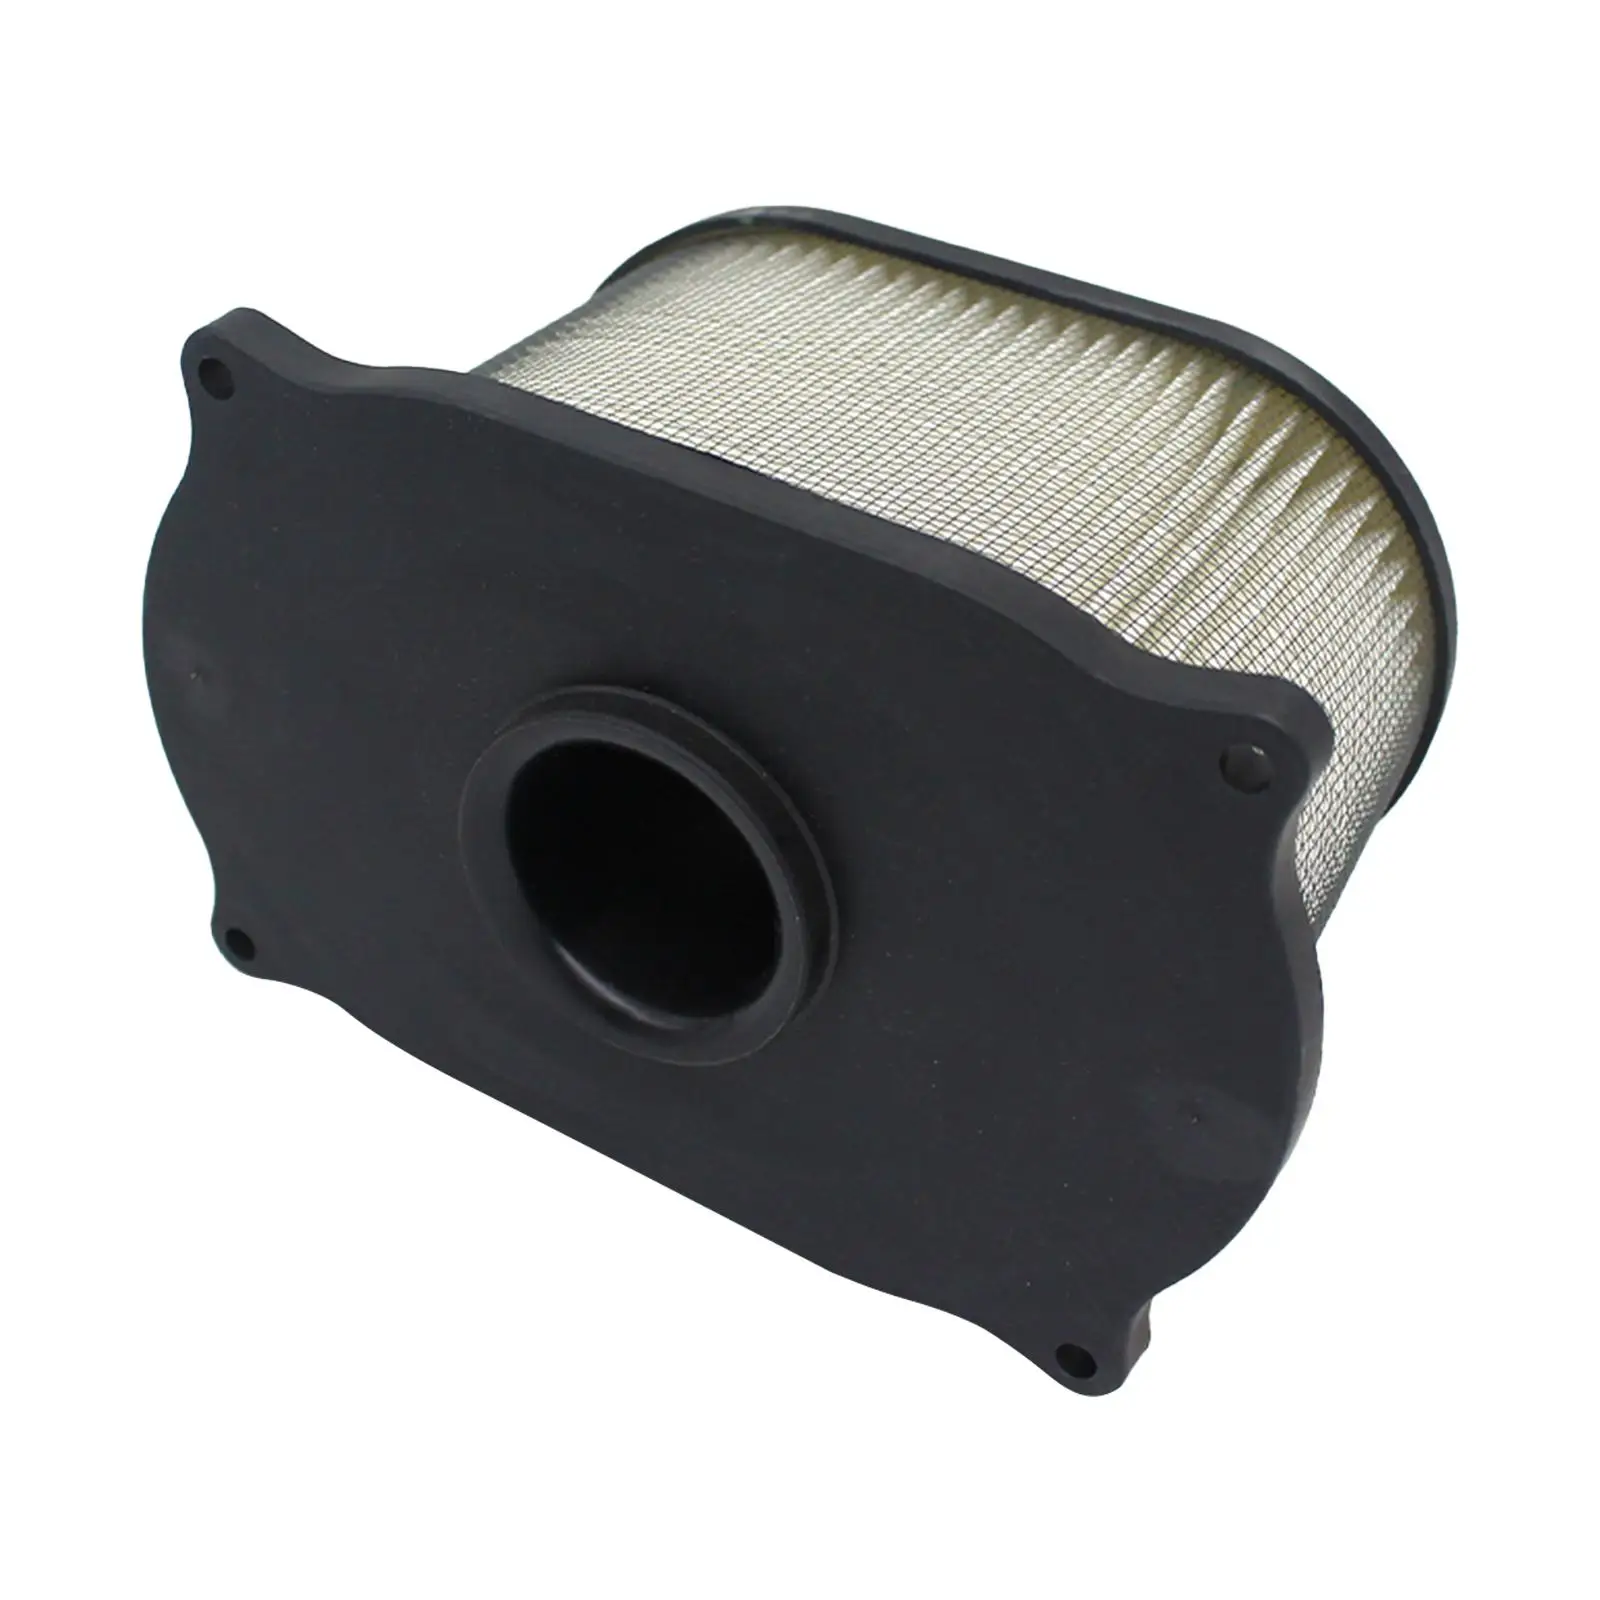 Engine Air Filter Intake Air Filters for Hyosung GT 125 COMET R 2006-2012 GT 650 COMET 2004-2006 GV 650 Aquila 2005-2008